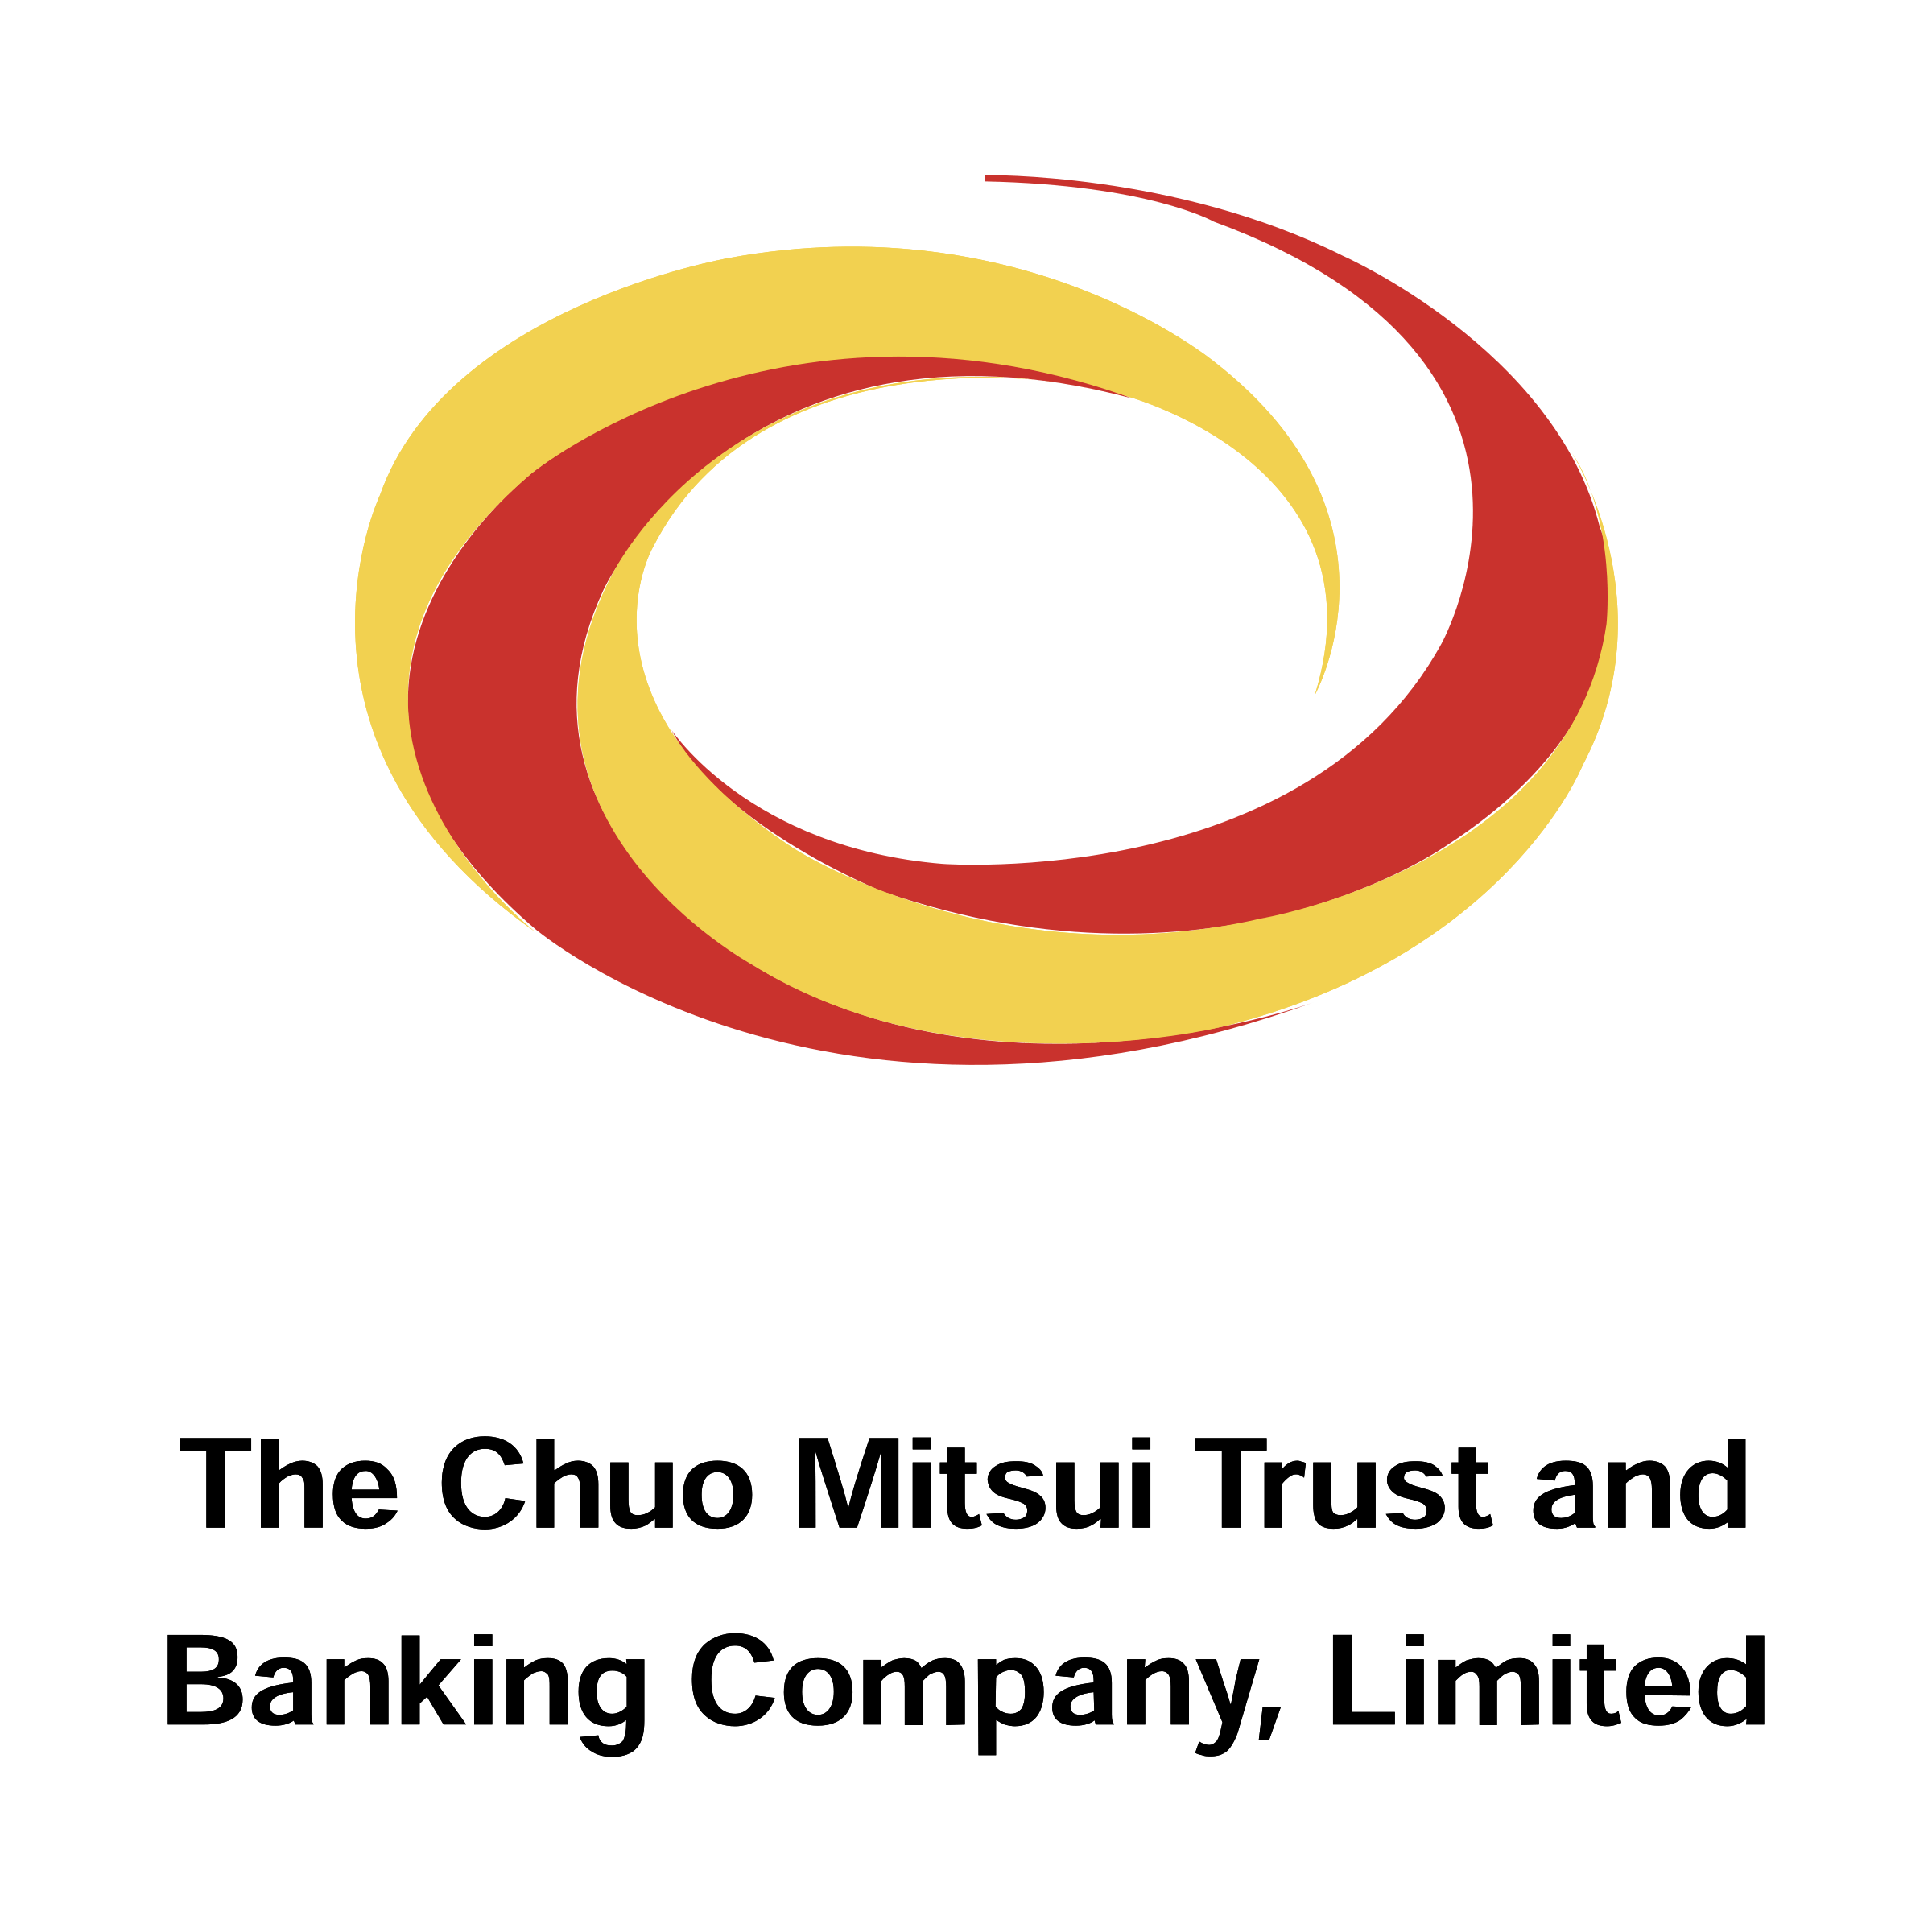 Mitzui Logo - The Chuo Mitsui Trust and Banking Company Logo PNG Transparent & SVG